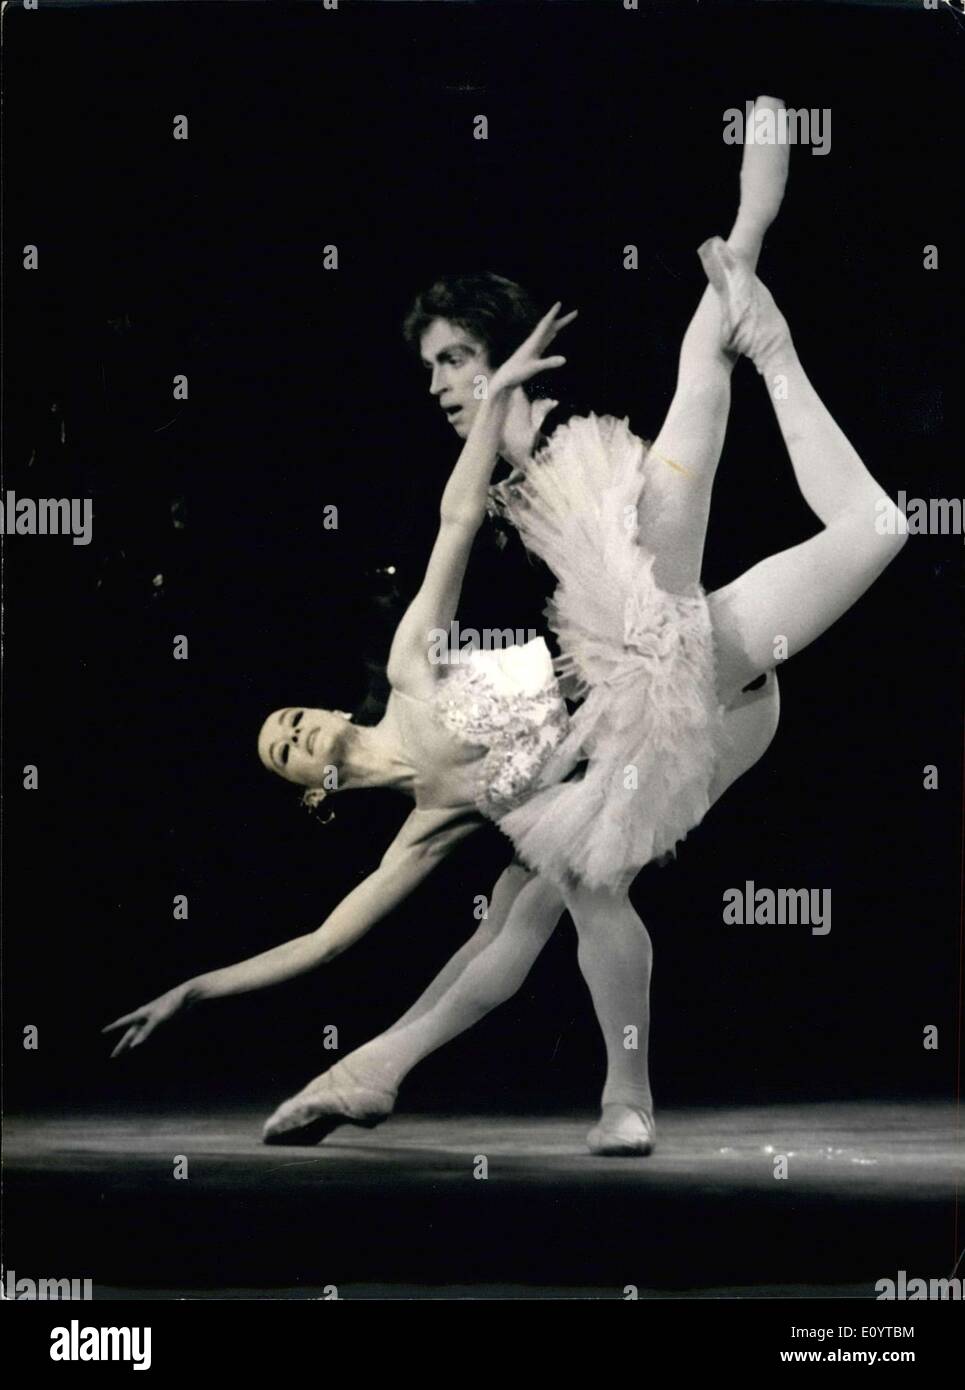 May 12, 1971 - Rudolf Nourreev and Noella Pontois will be reunited at the Palais des Sports tonight where they will interpret the famous ballet by Tchaikovski and Perrault, ''Sleeping Beauty''. Rudolf Noureev and Noella Pontois are pictured rehearsing the ballet. Stock Photo